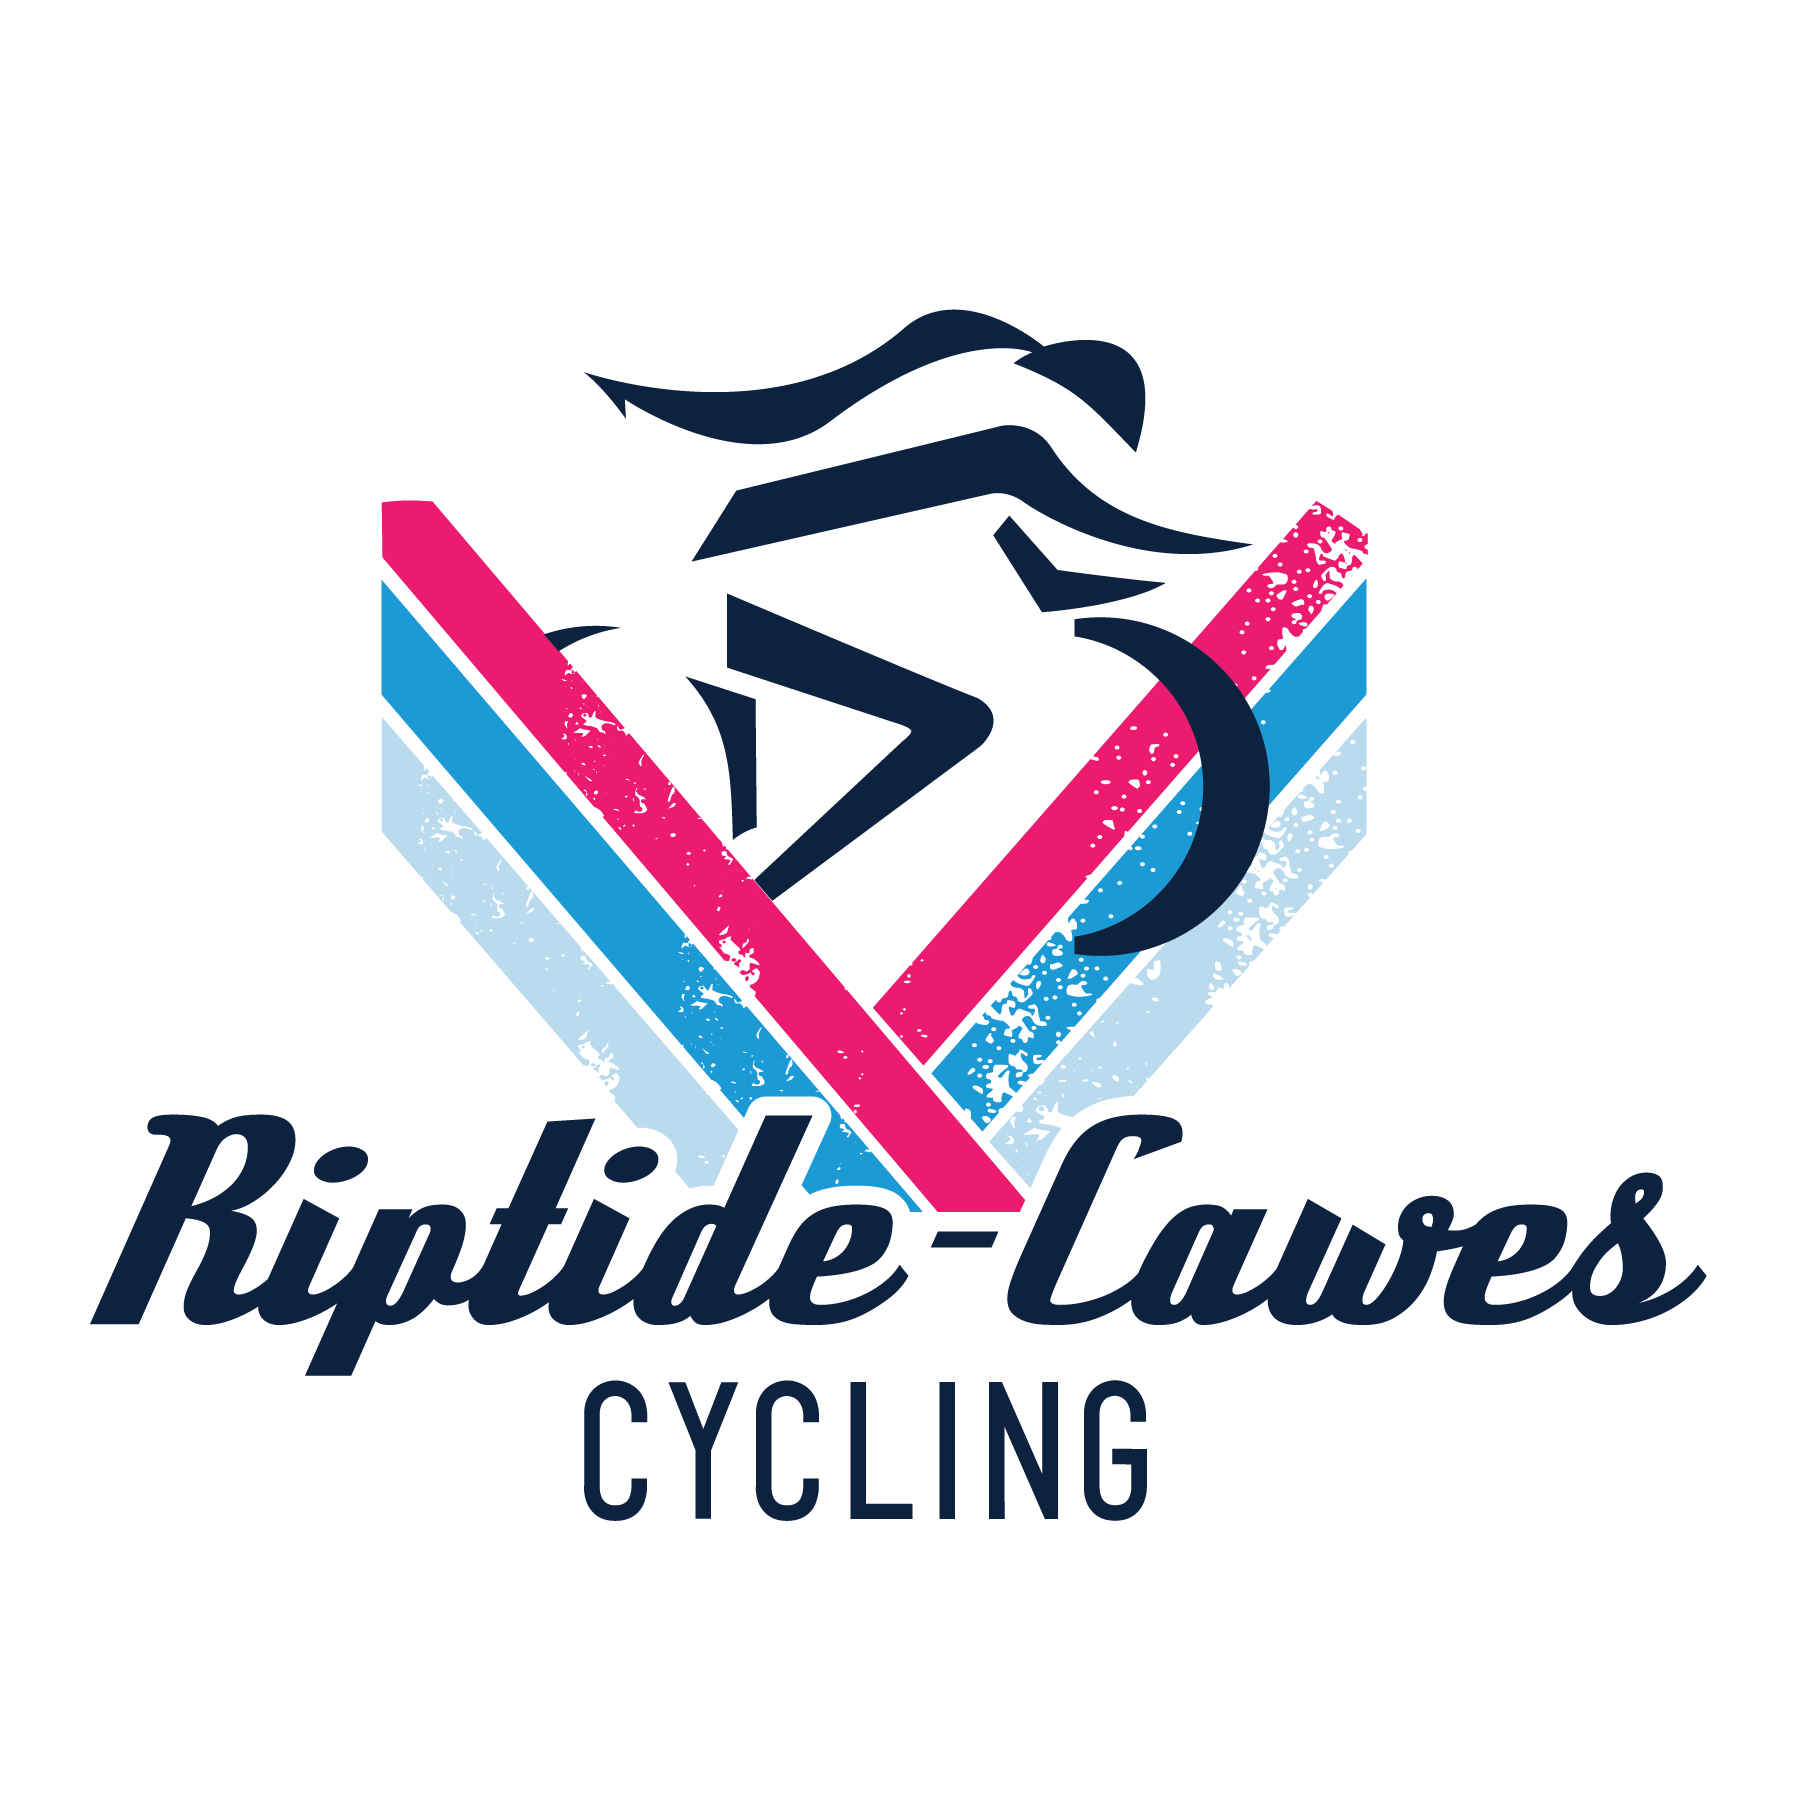 Riptide - Cawes Cycling logo